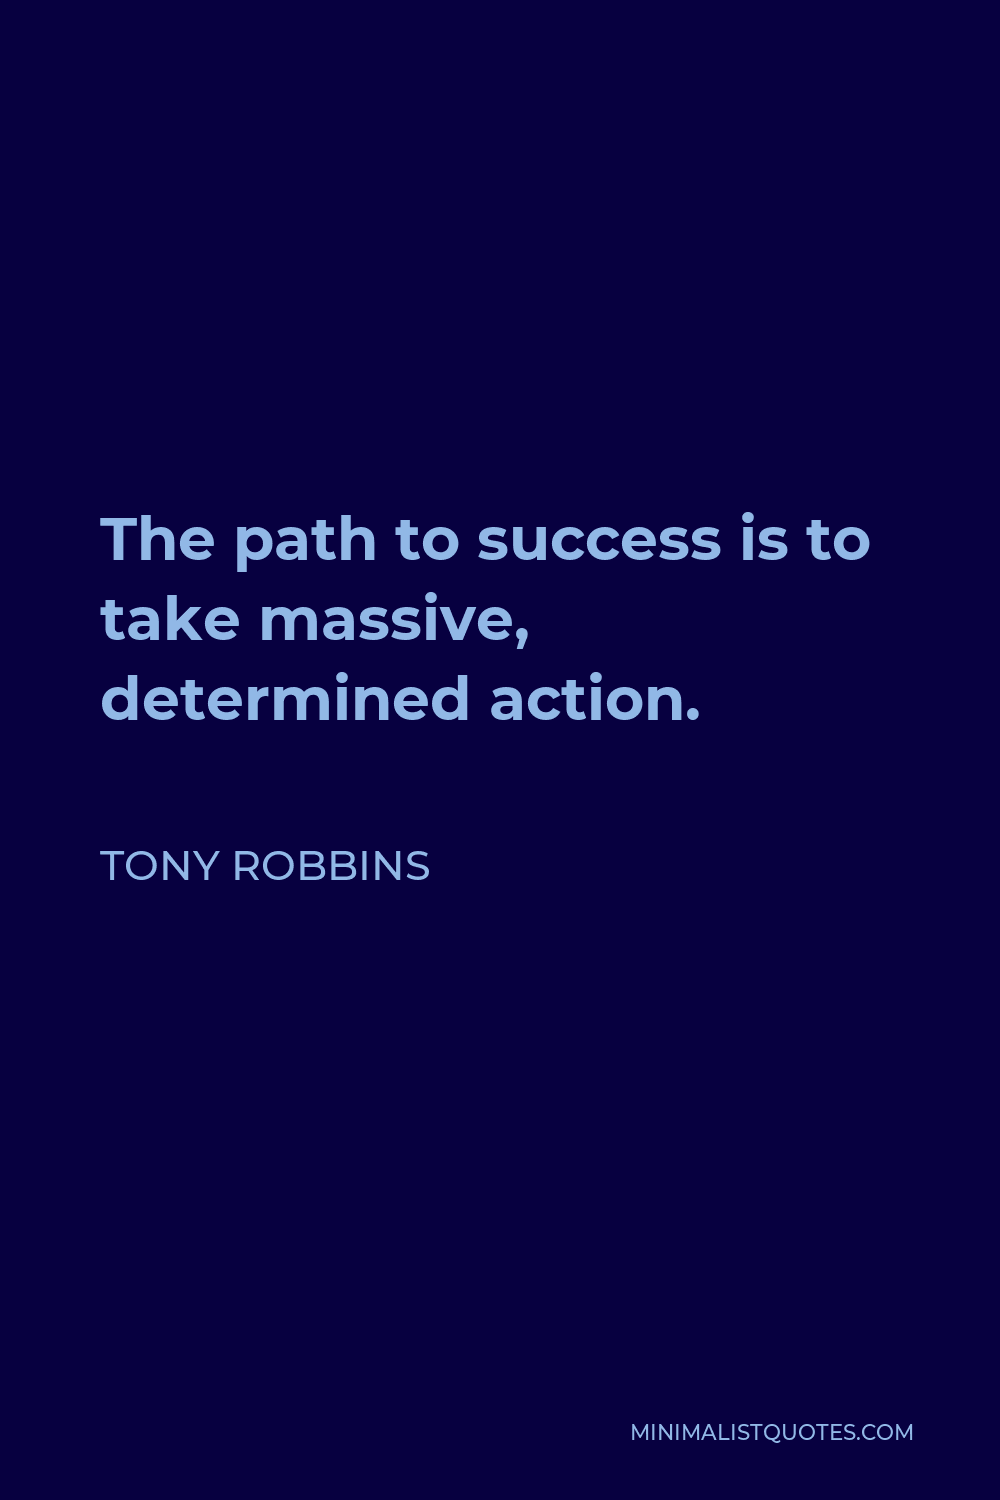 Tony Robbins Quote - The path to success is to take massive, determined action.